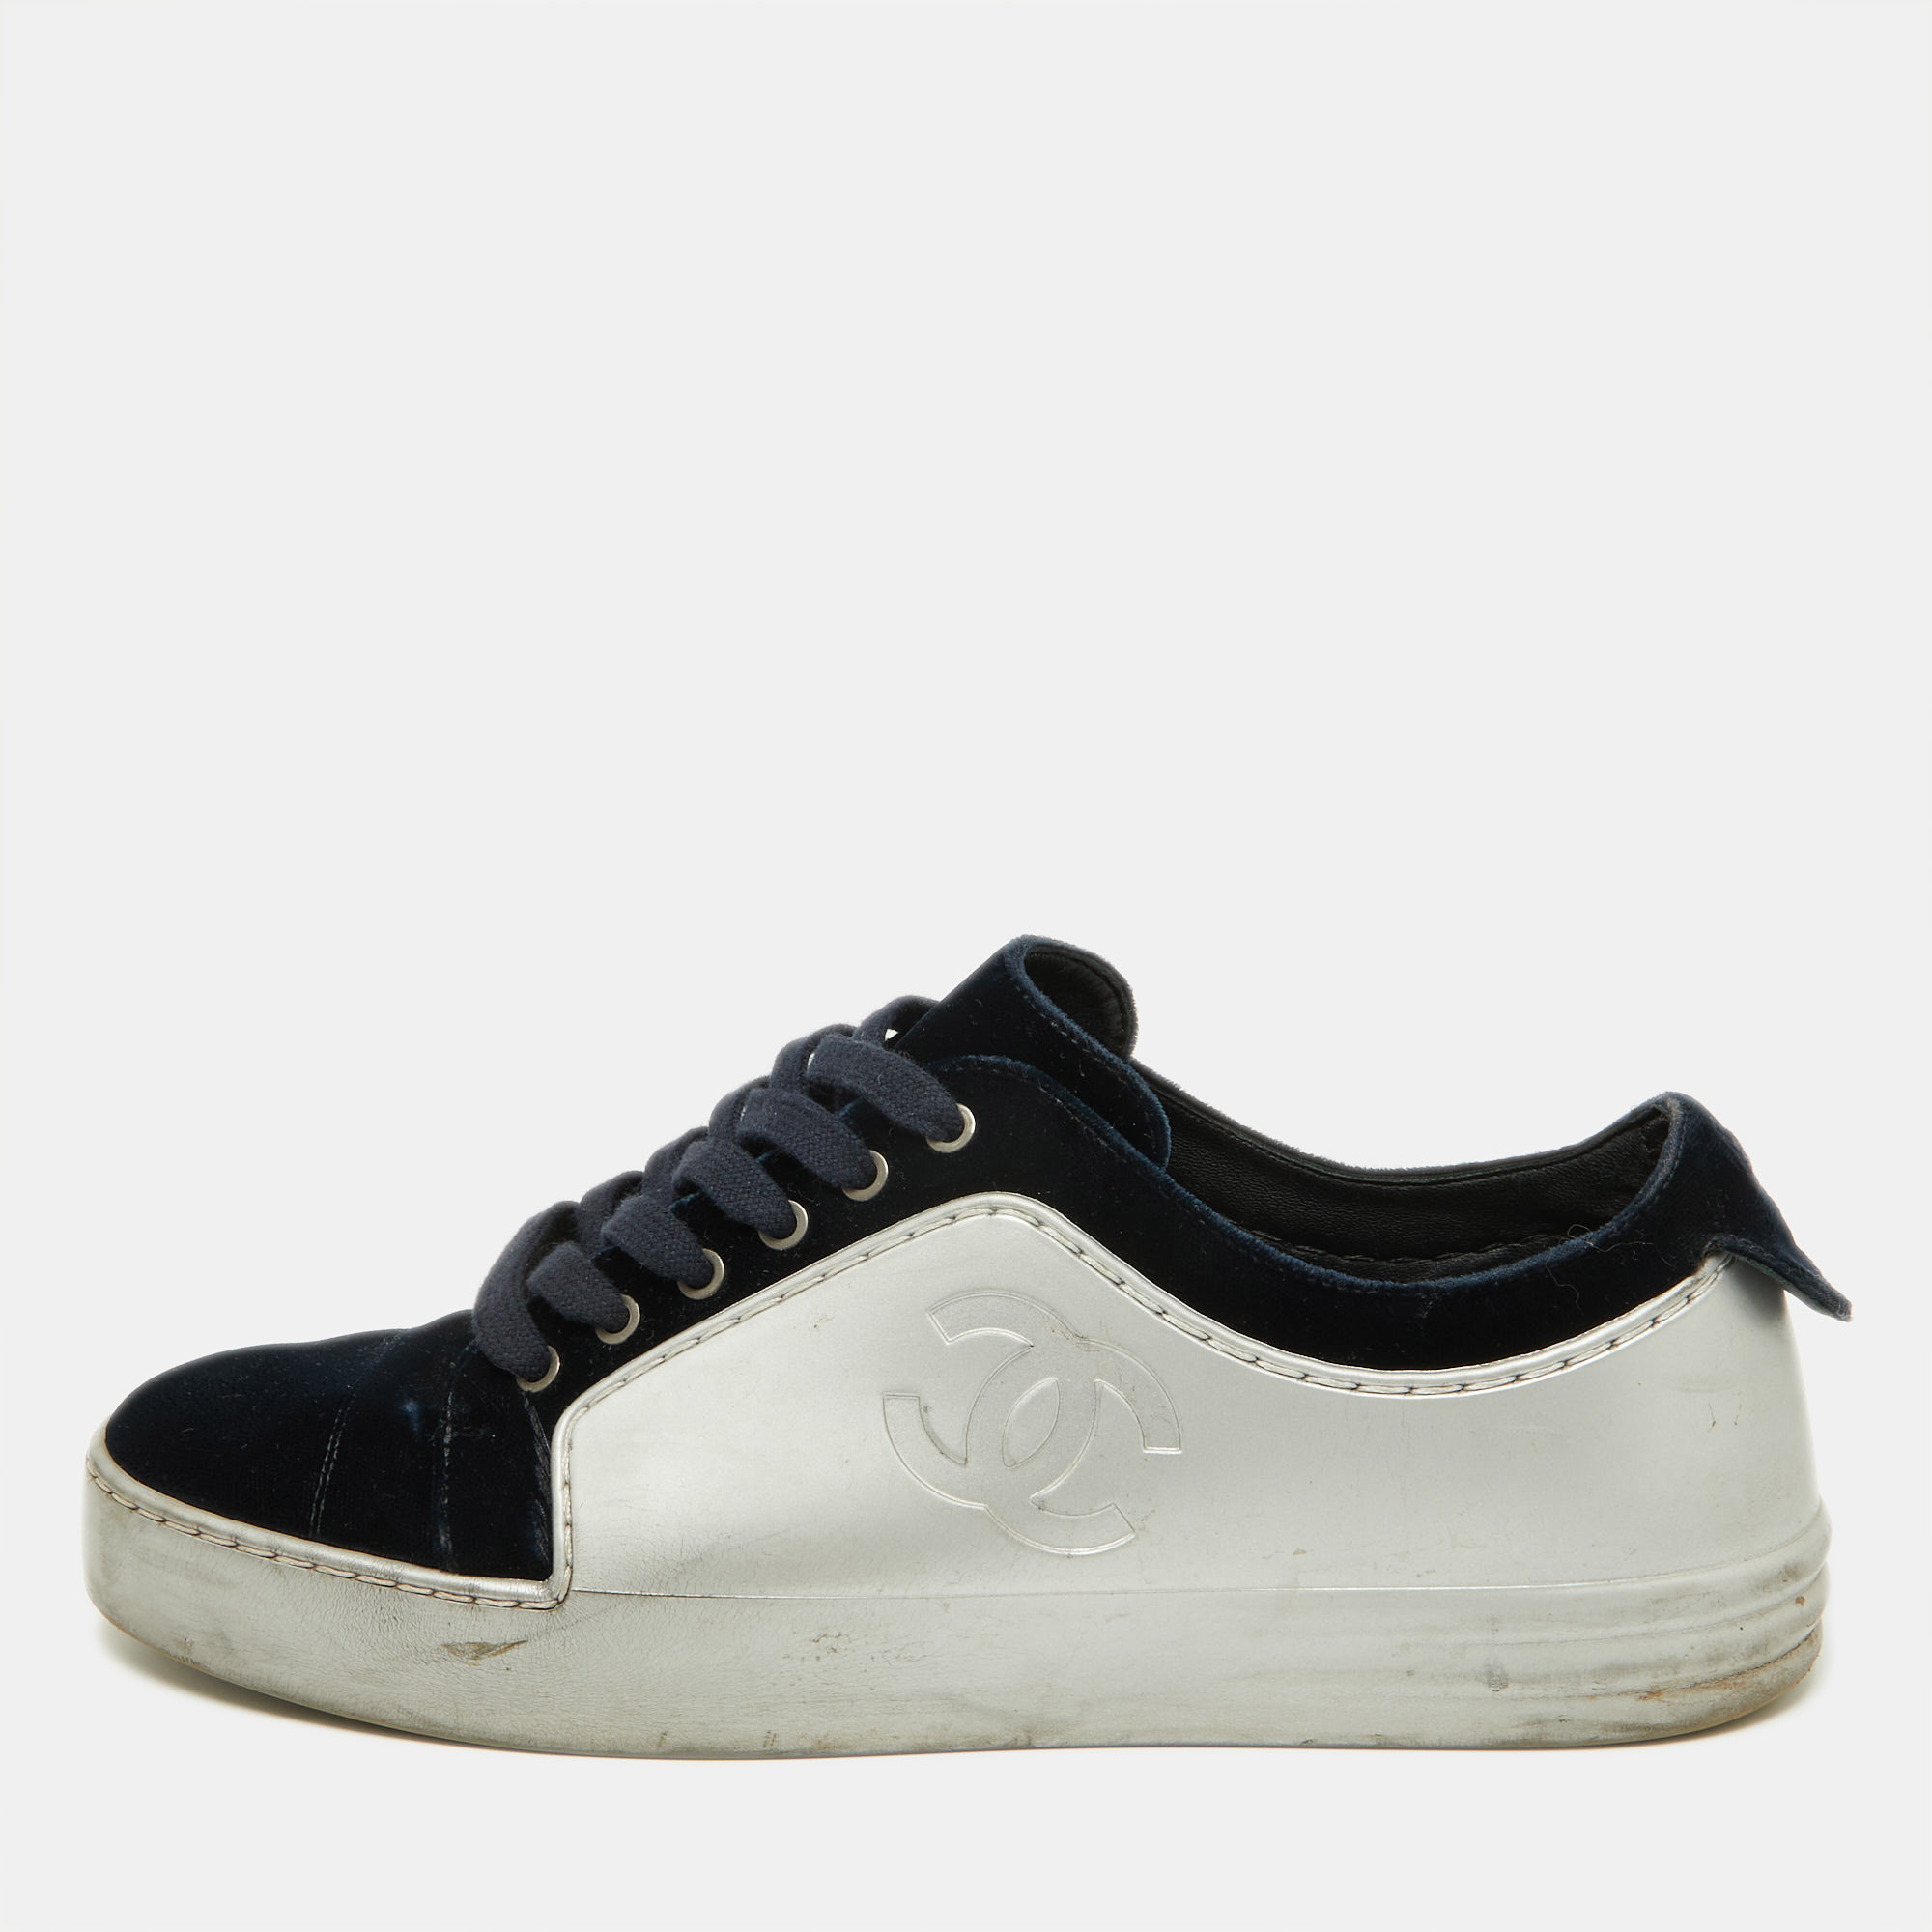 Chanel silver/blue velvet and rubber cc low top sneakers size 38